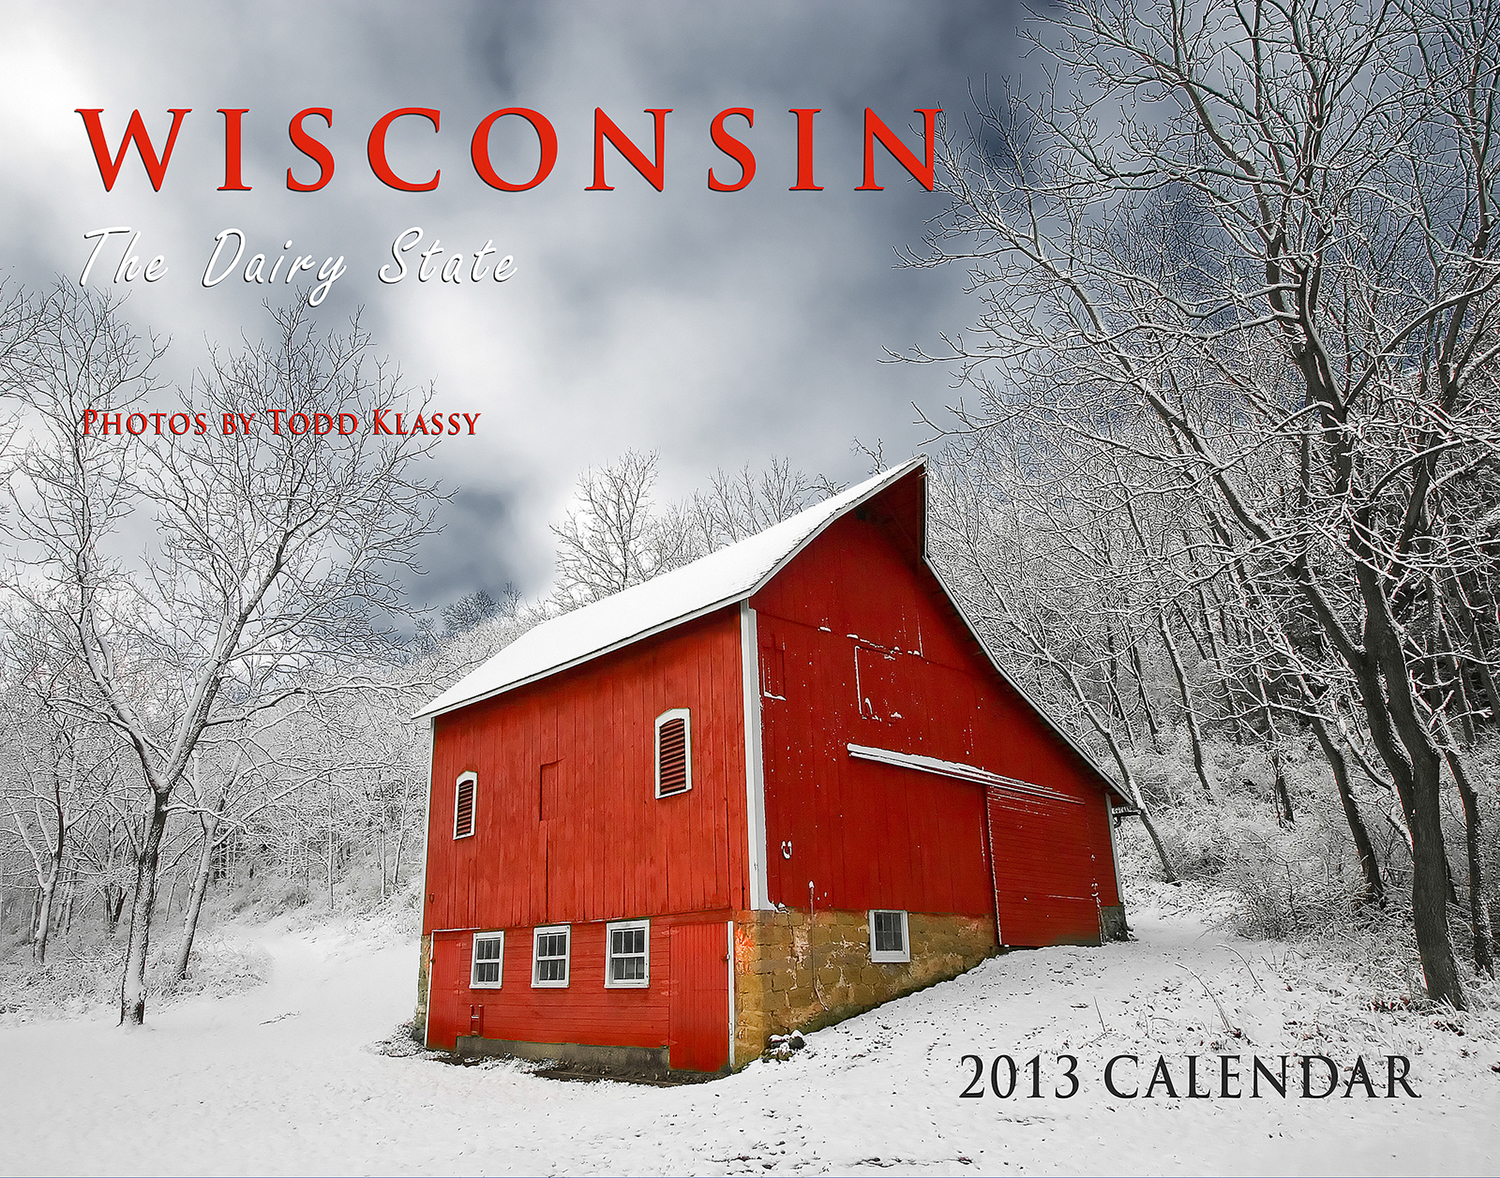 And my 2013 Wisconsin calendar, featuring some of my best Wisconsin photography, is also available now.